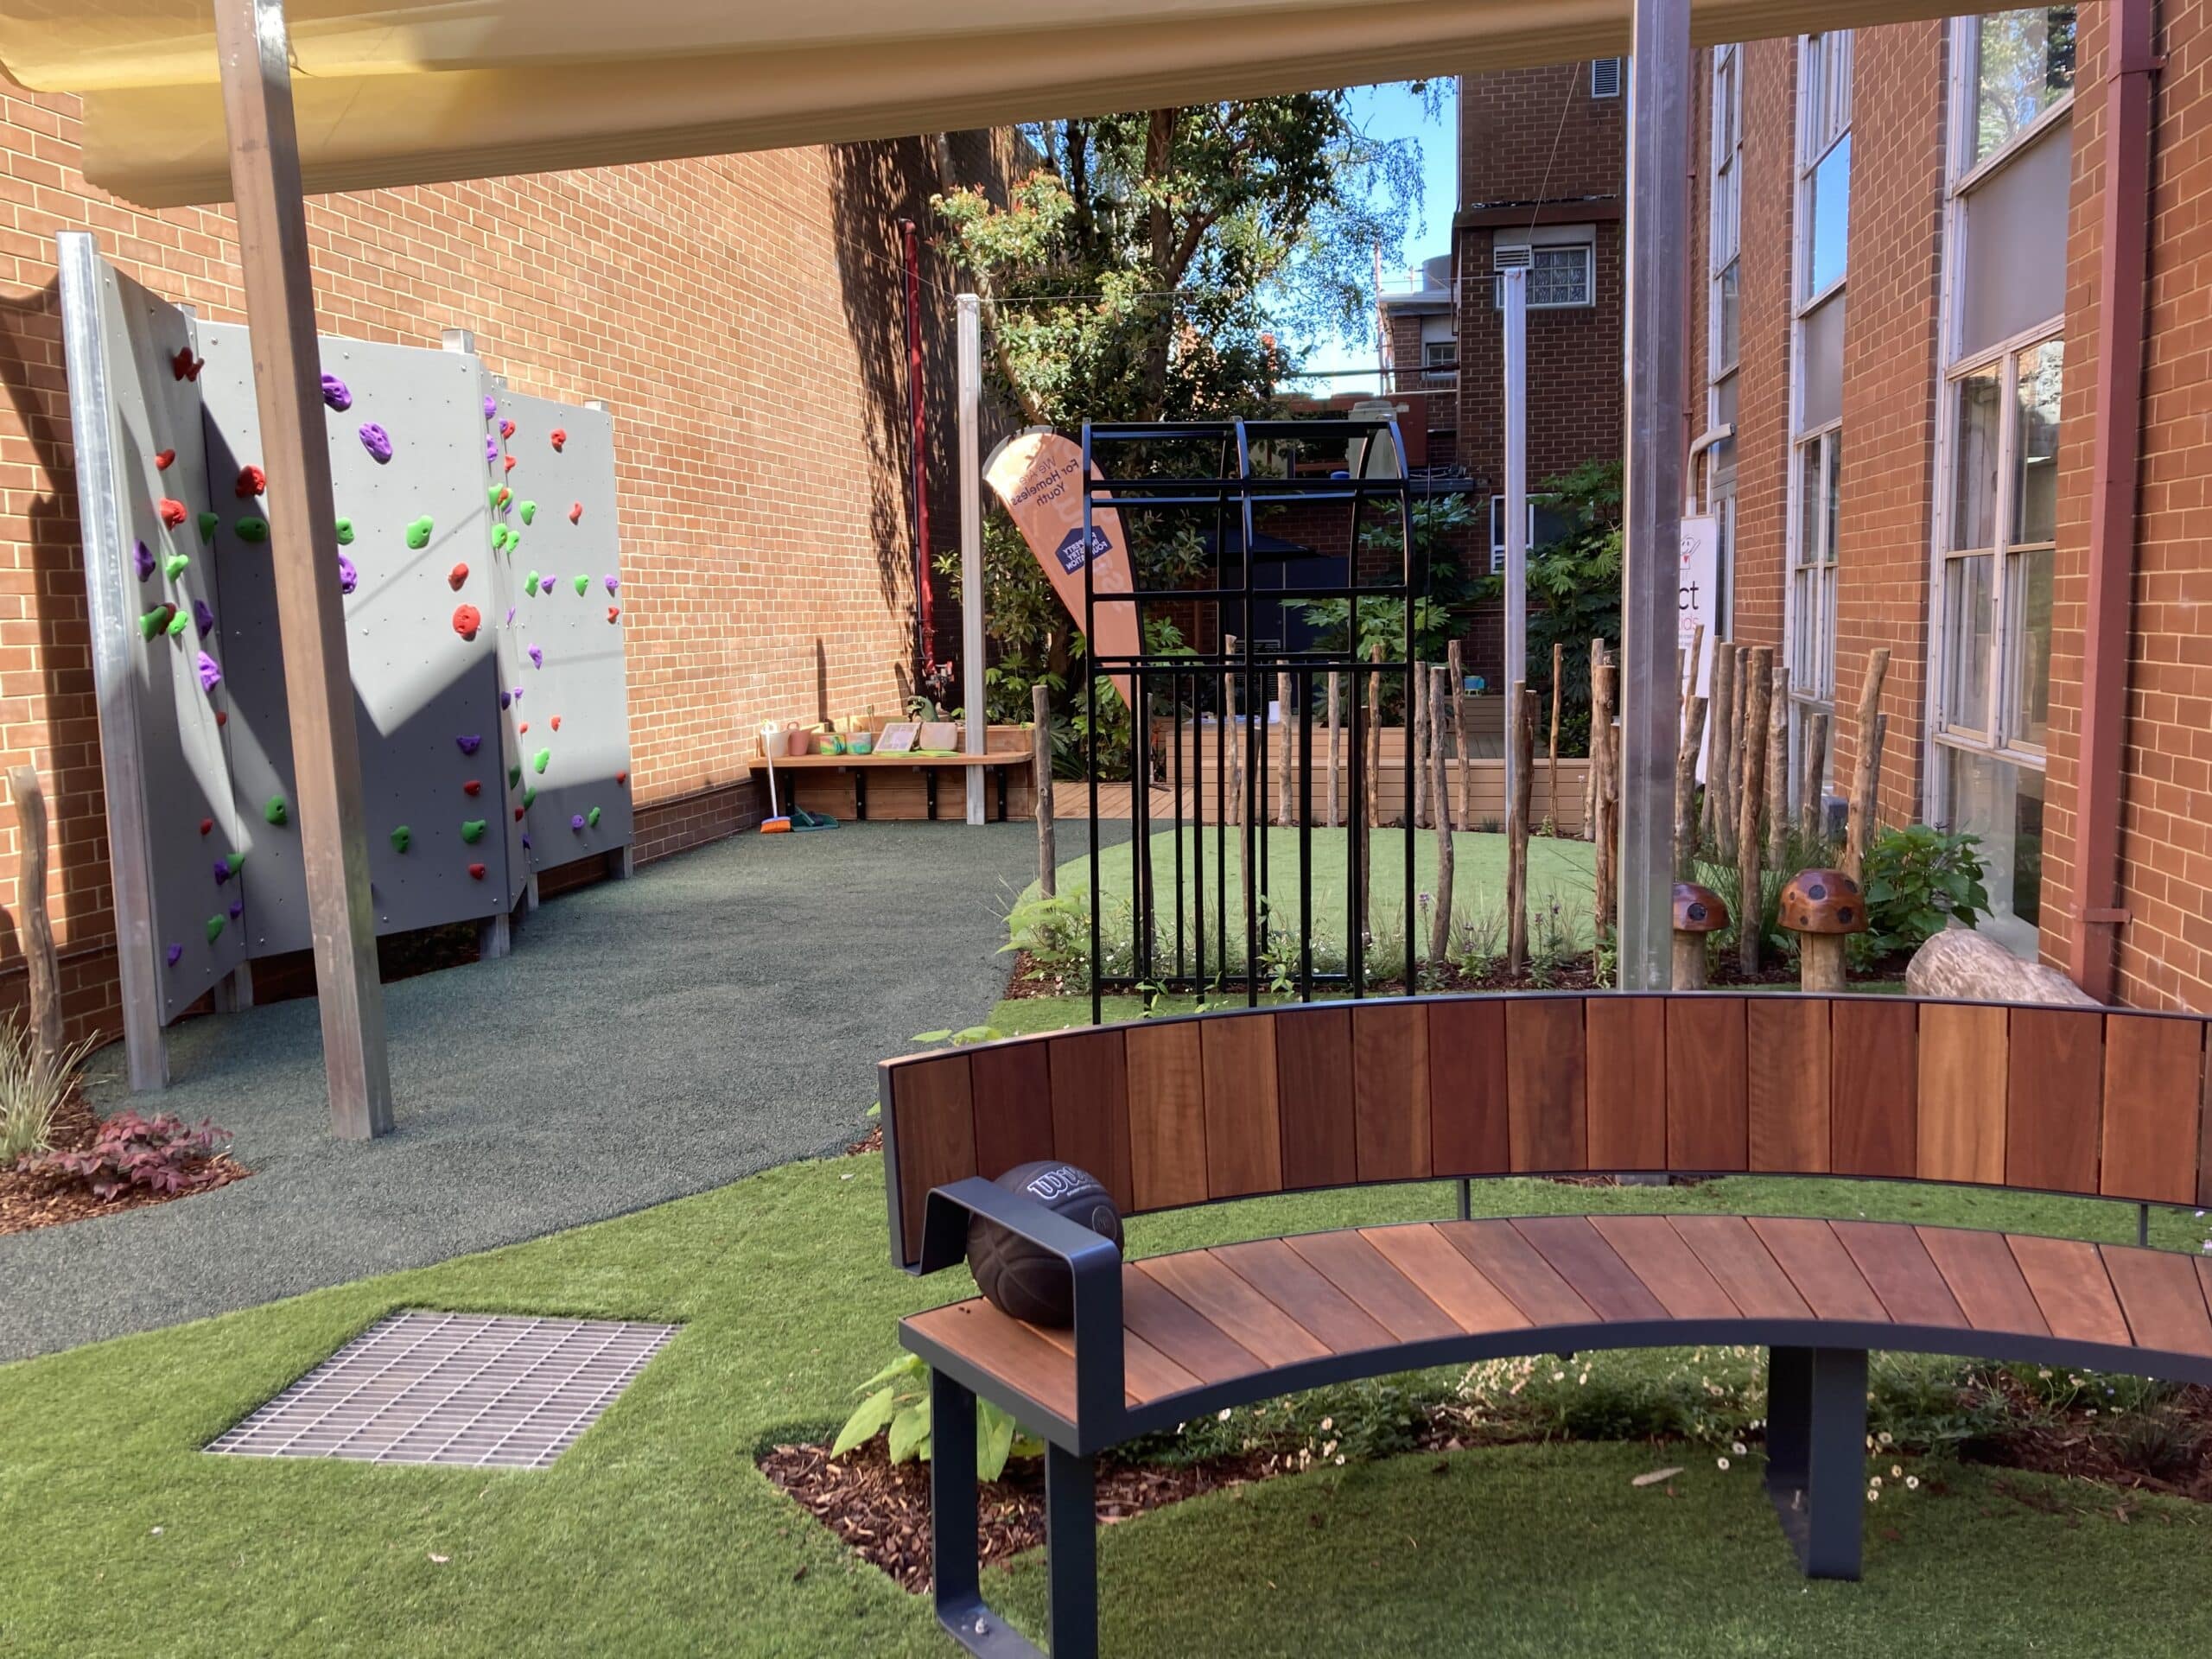 MEDIA RELEASE - Major upgrades to Act for Kids therapy centre to meet increasing demand in Victoria